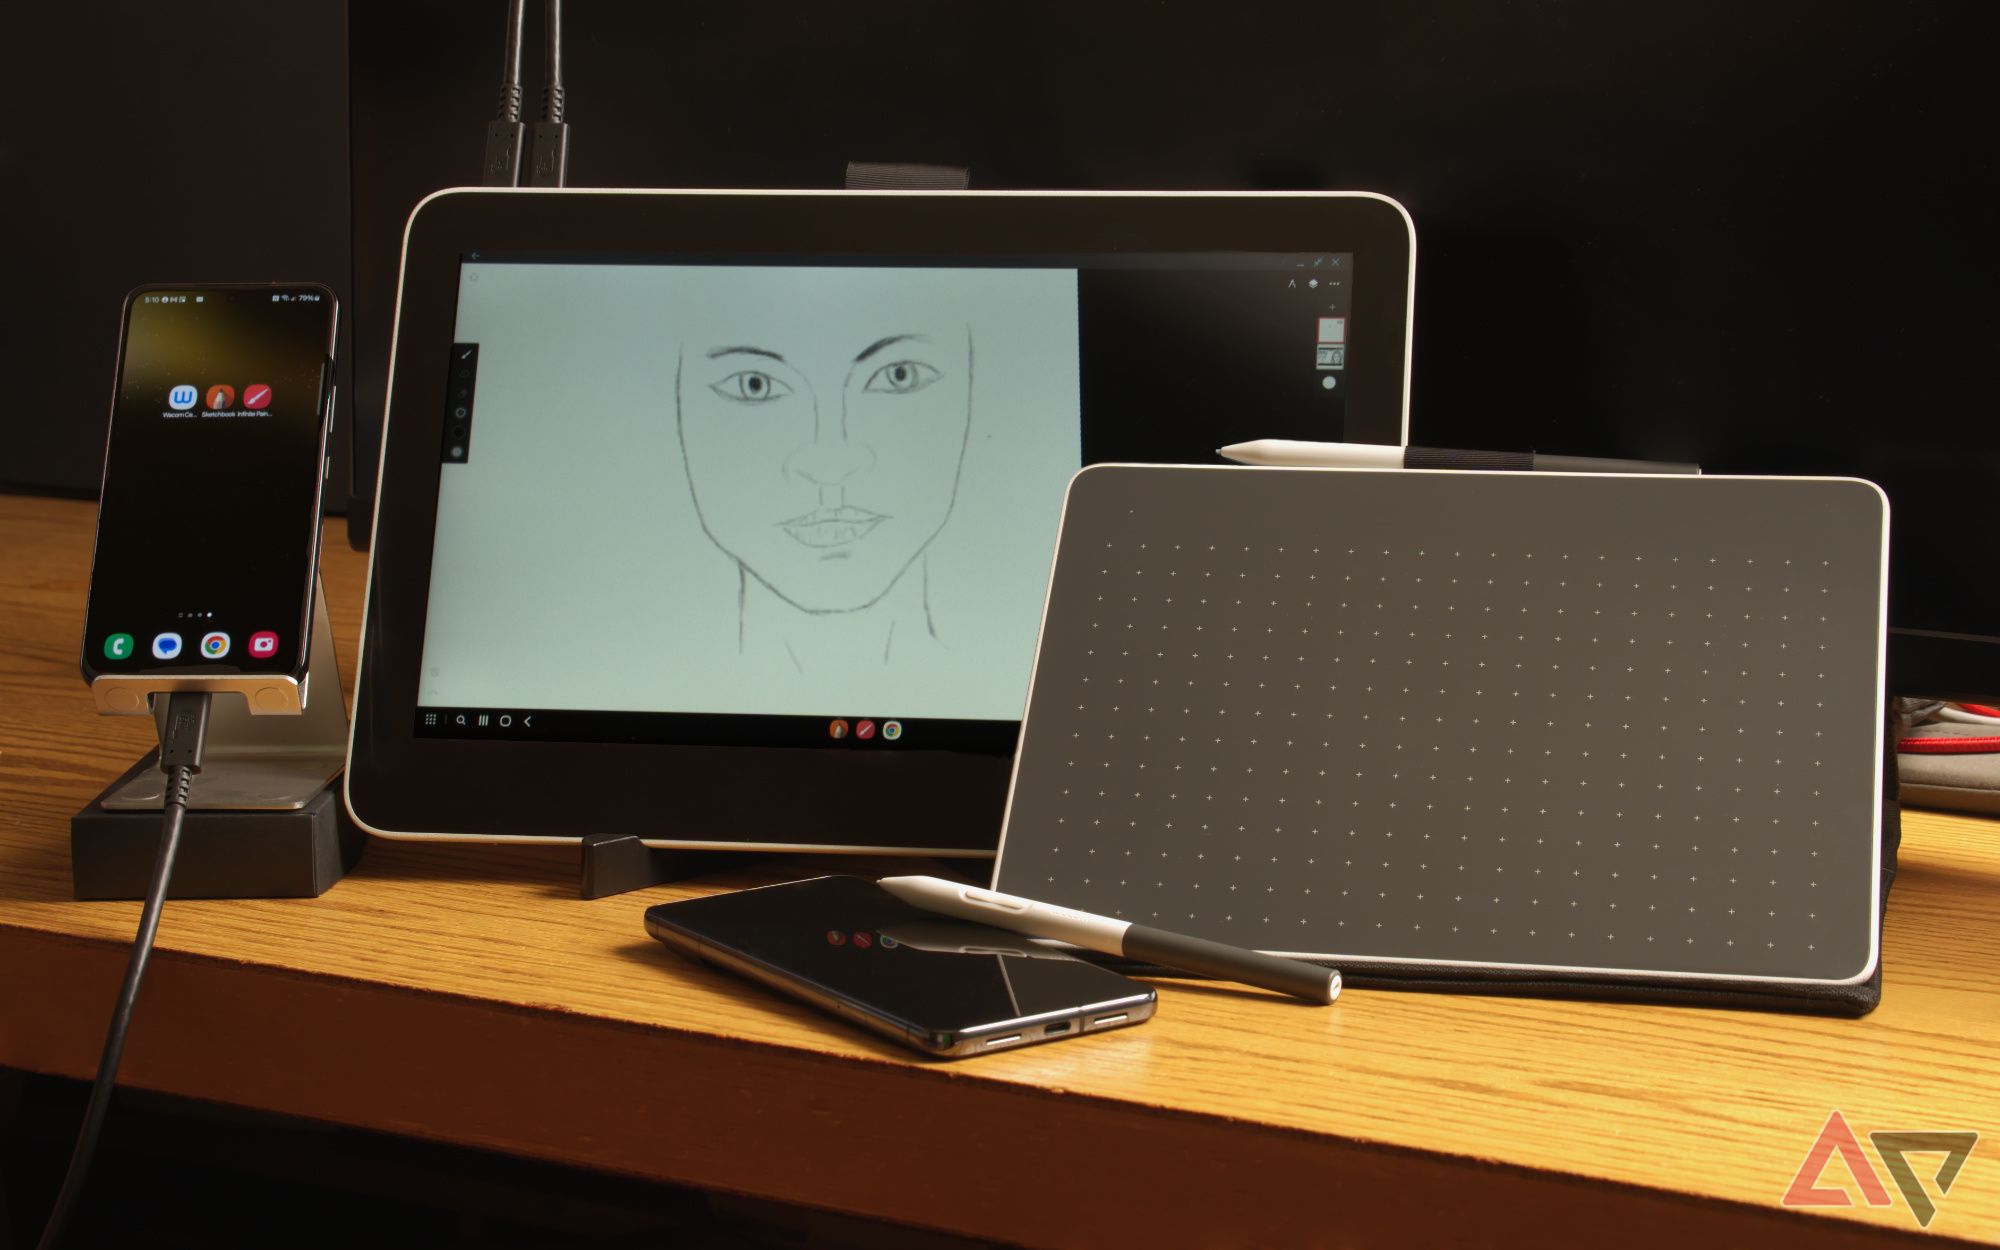 Wacom drawing tablets propped up on a desk next to phones, one shows a drawing